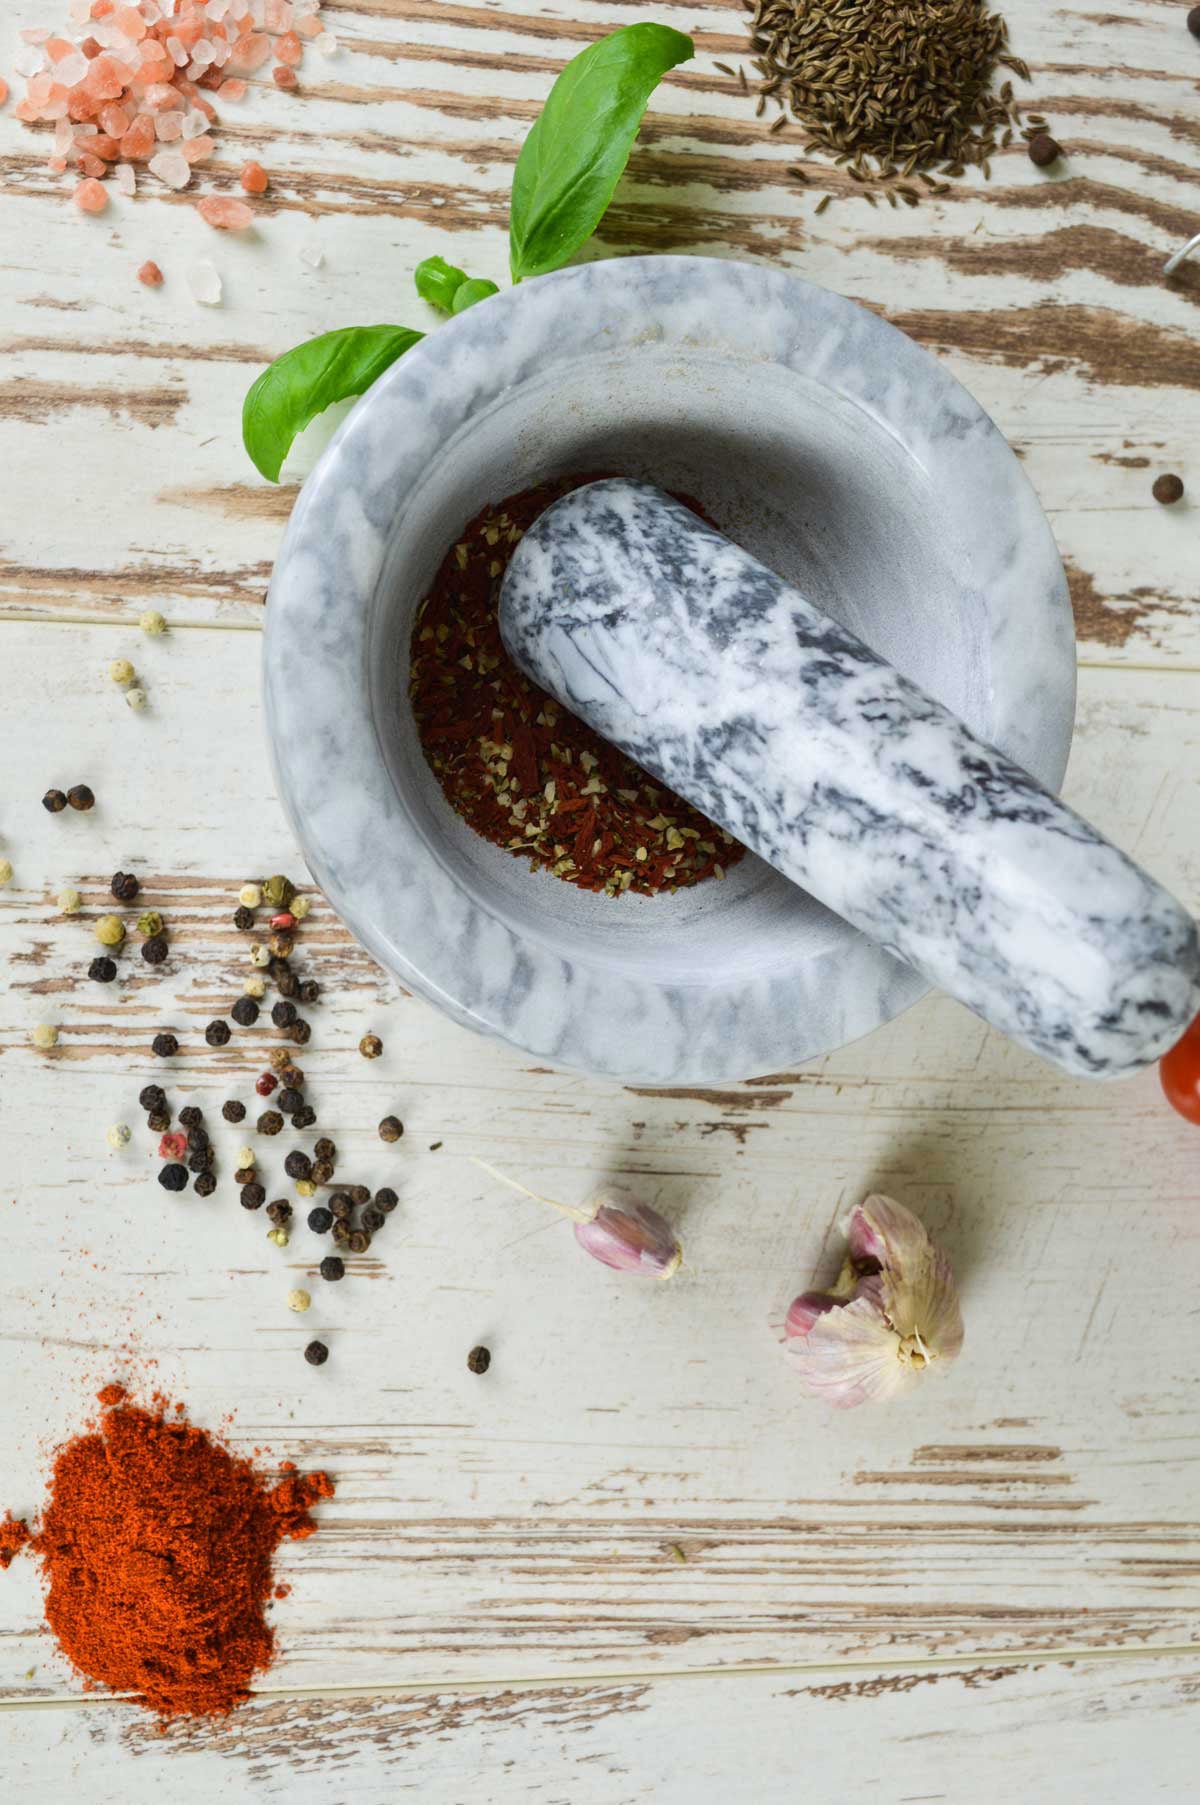 Mortar with pestle 2 pieces made of marble Ø13 Schlegel crusher spice mortar 2.3 kg